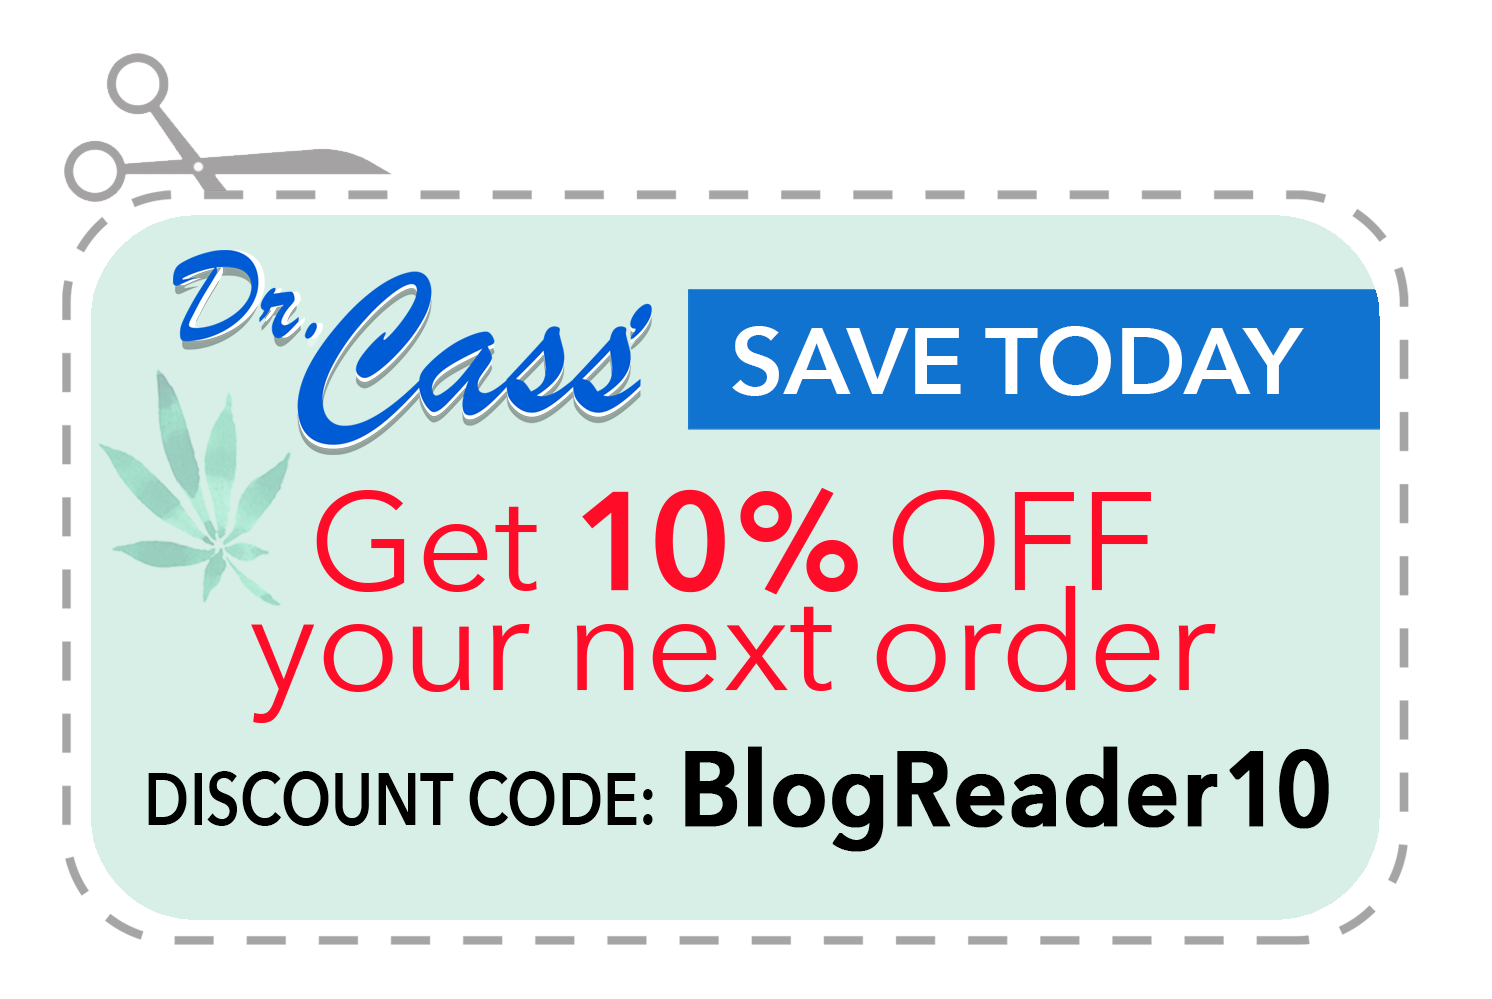 Save 10% for Reading our Blog.